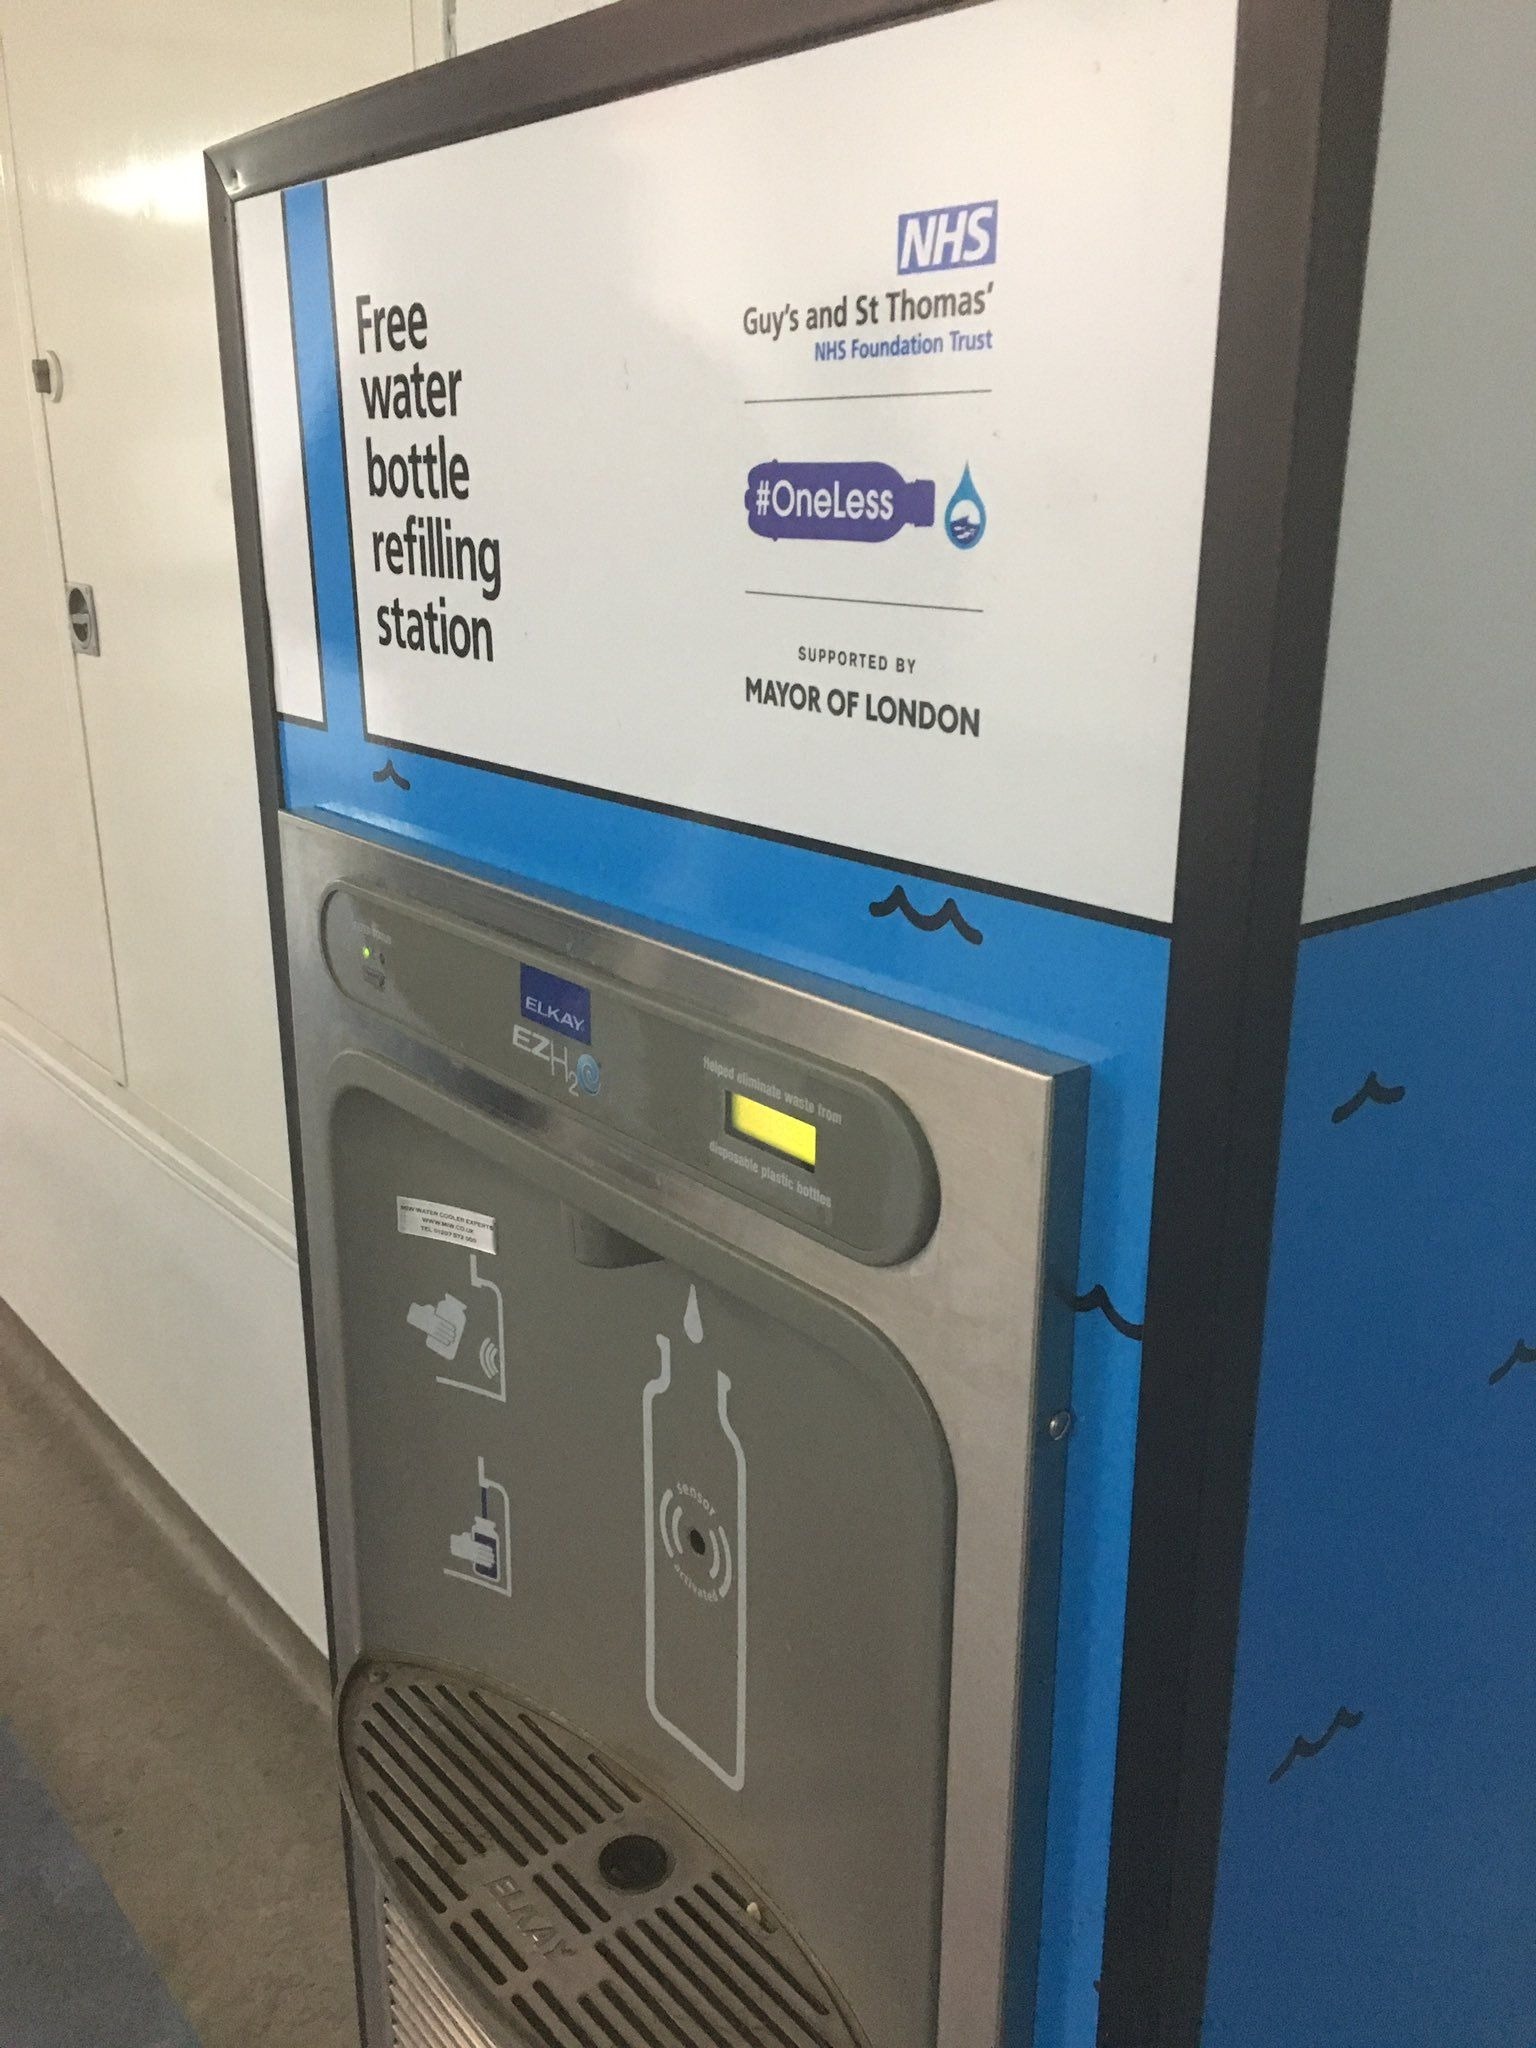 New indoor vandal-proof drinking fountain and bottle refill station with Guy’s and St. Thomas’ Hospitals branding